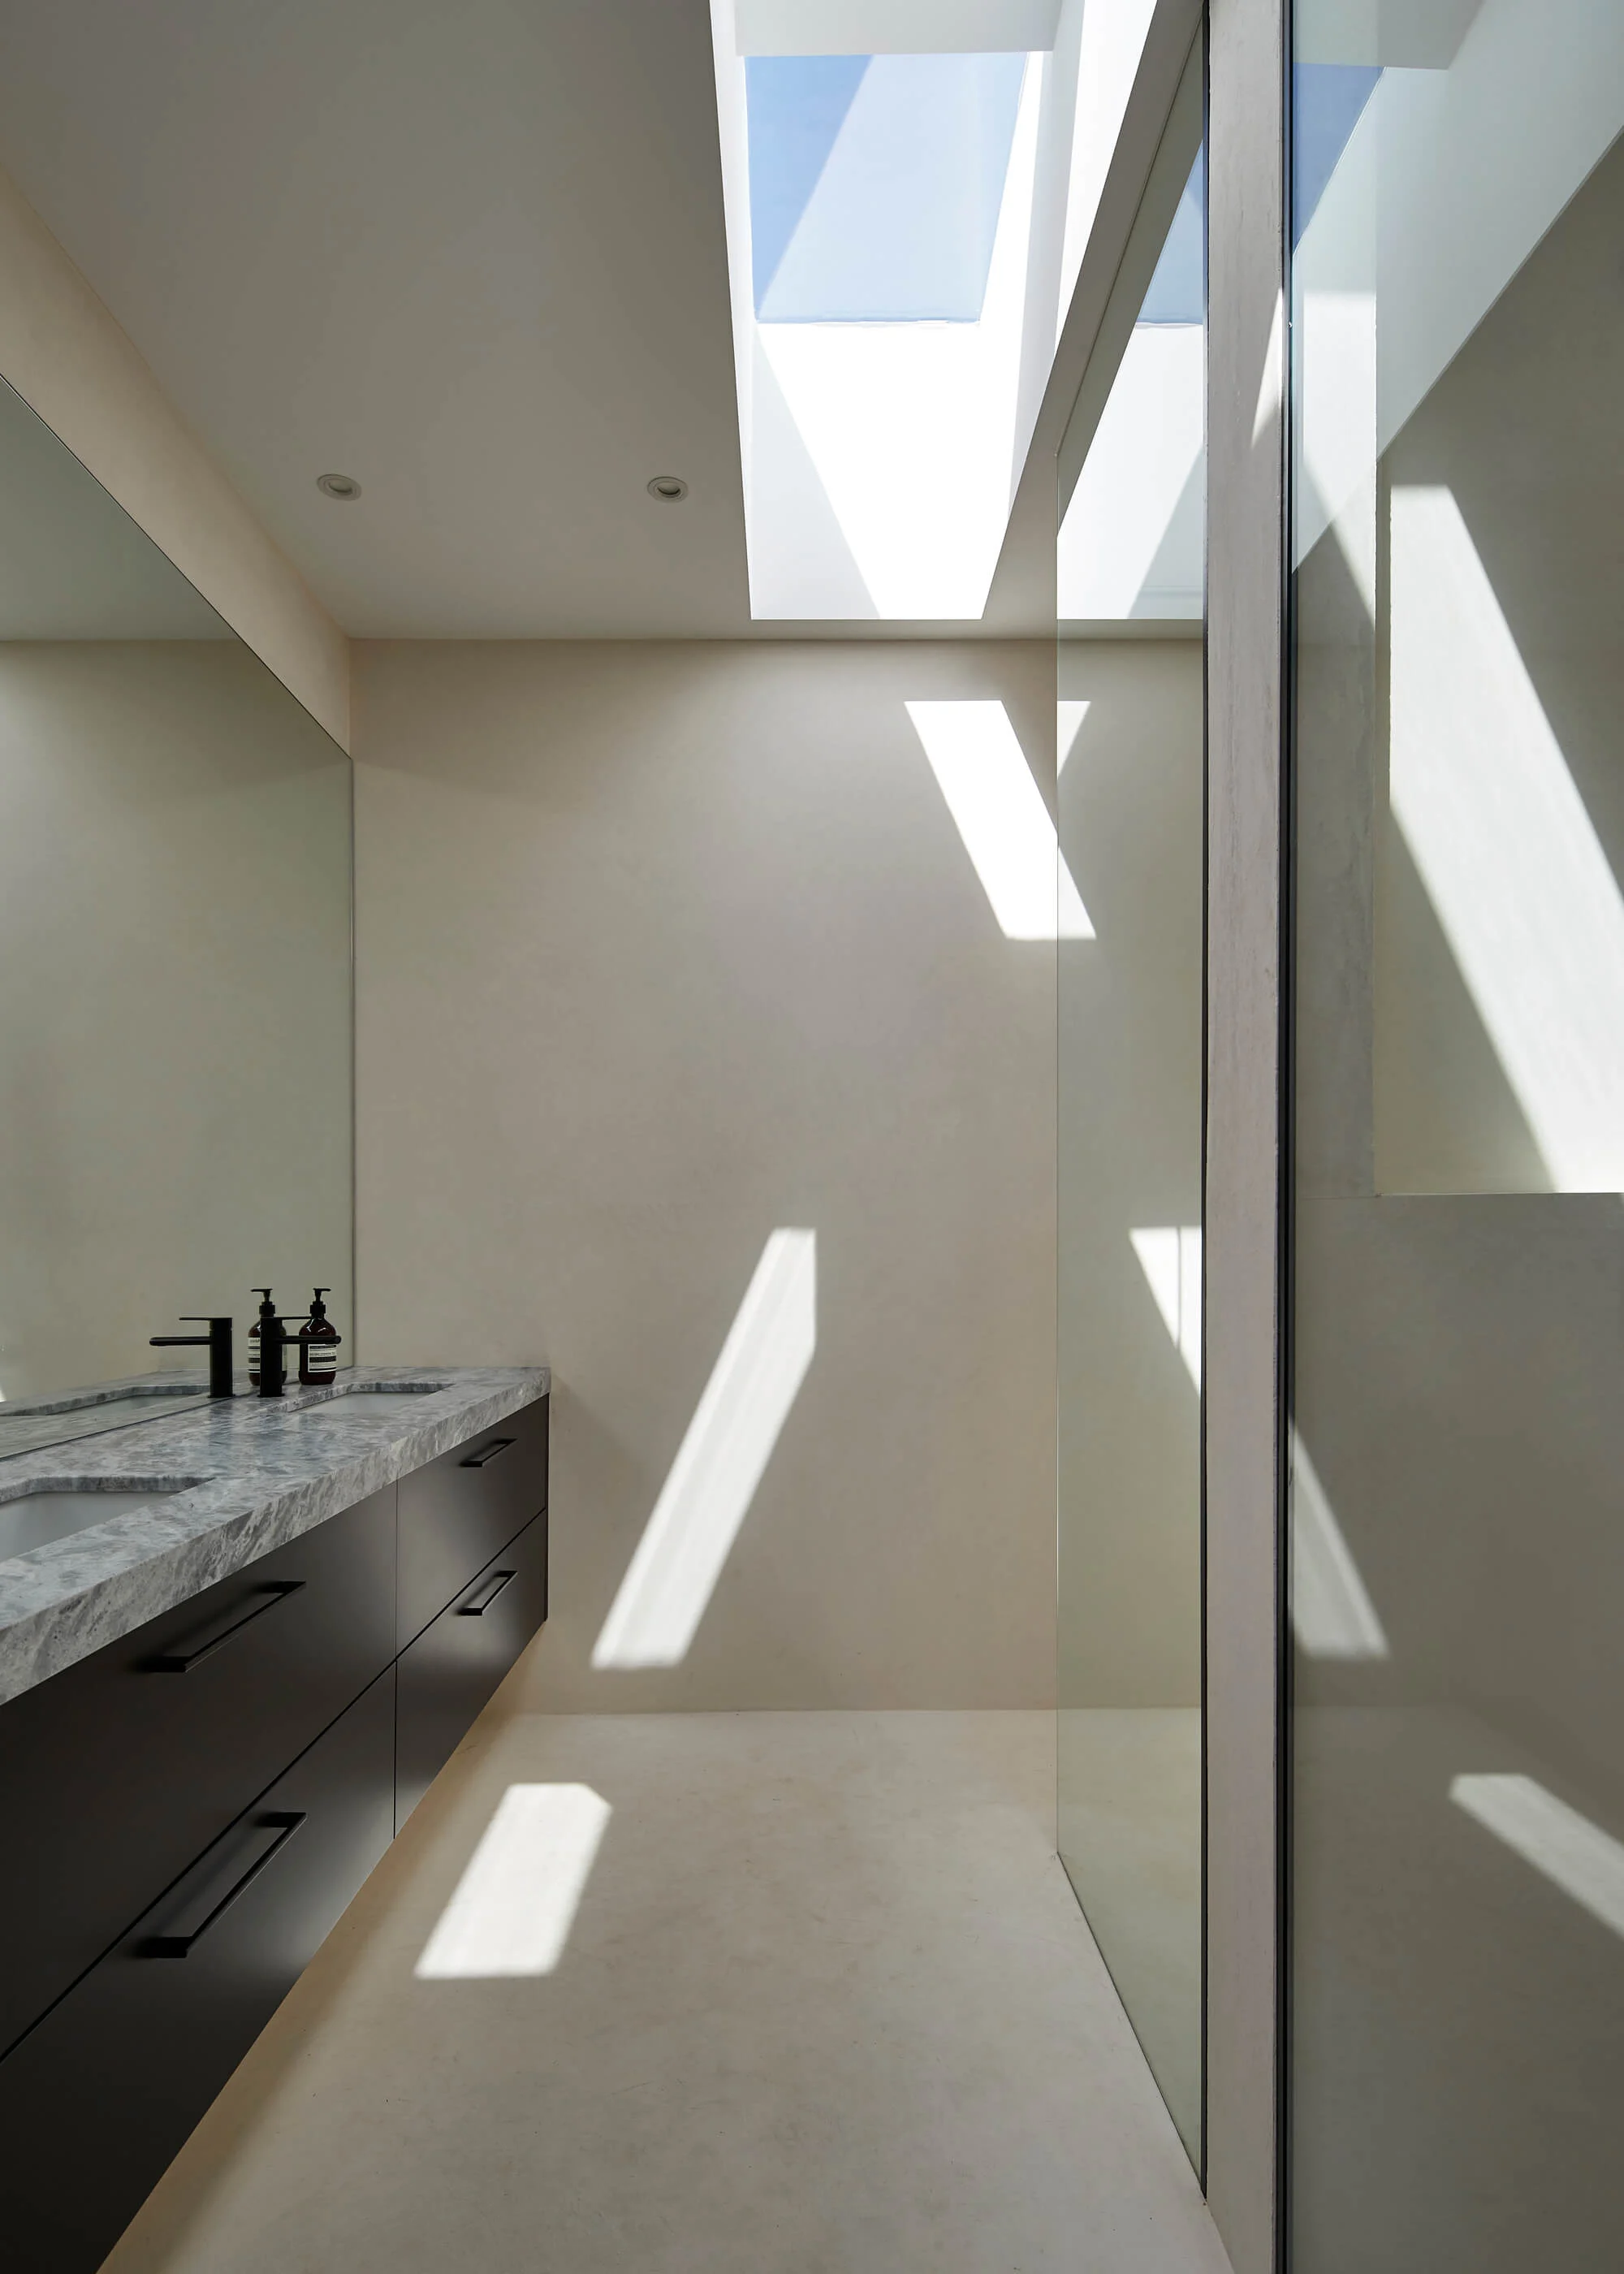 A bathroom with a double vanity and a skylight
